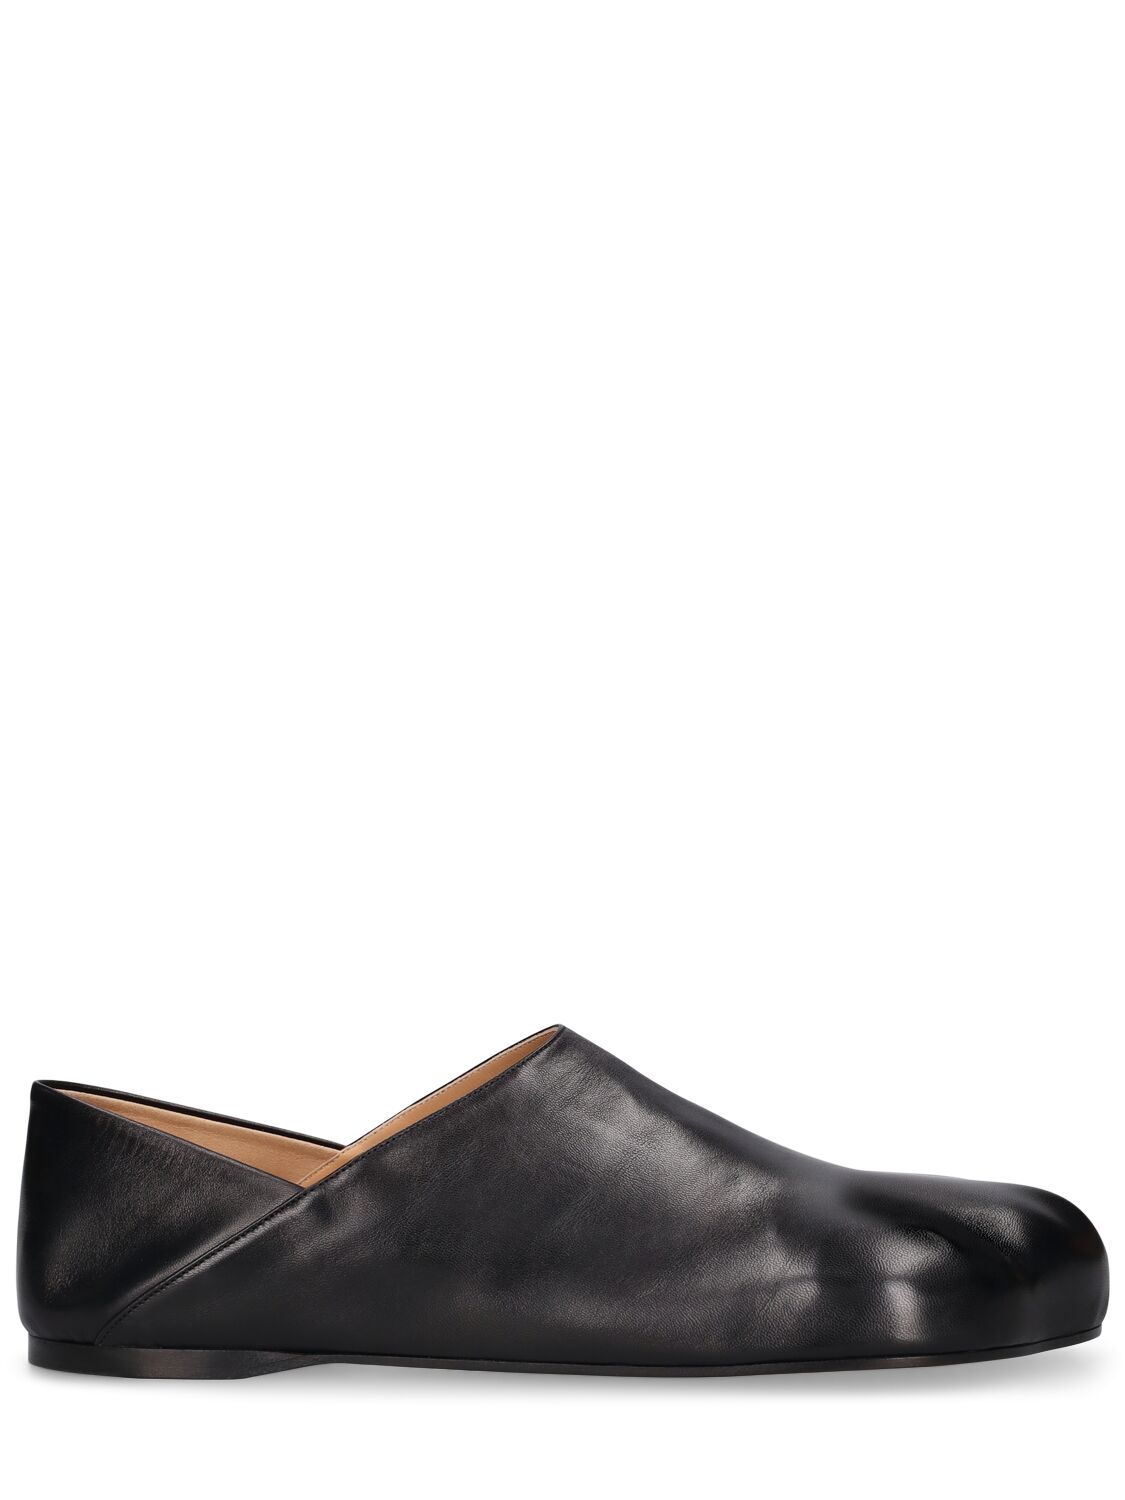 Image of Paw Leather Loafers